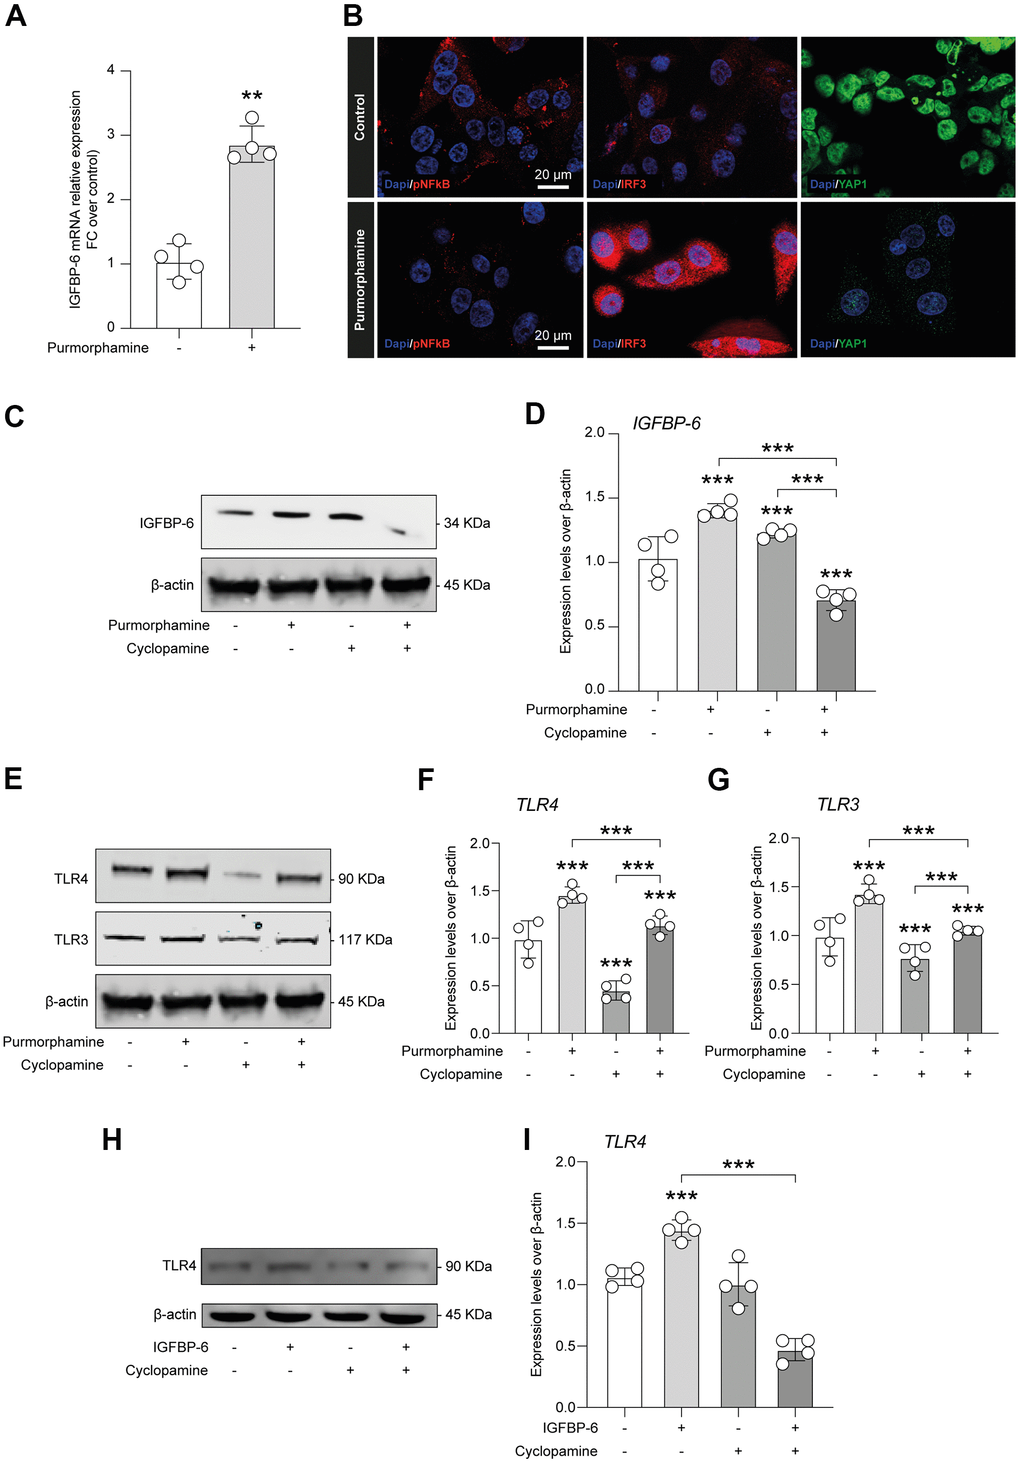 IGFBP-6-induced TLR4 signalling is controlled by SHH signalling through SMO. (A) qPCR results obtained for IGFBP-6 in HS5 cells exposed or not to purmorphamine. Relative mRNA expression level normalized with β-actin by using a comparative 2-ΔΔCt method. **P B) Immunofluorescence analysis were performed on HS5 cells exposed or not to purmorphamine, followed by fixing and staining with anti-pNF-kB (red), anti-IRF3 (red), and anti-YAP1 (green). Nuclei were visualized using DAPI. Immunoreactivity was evaluated considering the signal-to-noise ratio of immunofluorescence (scale bar 20 μm). (C) HS5 cells exposed to purmorphamine, cyclopamine, or both were lysed and subjected to immunoblotting using a specific antibody against IGFBP-6. Protein content was normalized to the housekeeping protein β-actin. The entire assay was made in triplicate, a representative one is shown. Signals from immunodetected bands were semi-quantified by densitometry. (D) Statistical analysis of data revealed that IGFBP-6 expression was significantly increased after exposure to purmorphamine. Data are presented as means ± sem. **p E) HS5 cells exposed to purmorphamine, cyclopamine, or both were lysed and subjected to immunoblotting using specific antibodies against TLR4 and TLR3. Protein content was normalized to the housekeeping protein β-actin. The entire assay was made in triplicate, a representative one is shown. Signals from immunodetected bands were semi-quantified by densitometry. (F, G) Statistical analysis of data revealed that purmorphamine was able to increase while cyclopamine was able to suppress both TLR4 (F) and TLR3 (G) protein expression levels. Co-treatment with both SMO agonist and antagonist did not affect TLR4 and TLR3 expression levels, as compared to control cell cultures. Data are presented as means ± sem. **p H) HS5 cells exposed to IGFBP-6, cyclopamine, or both were lysed and subjected to immunoblotting using a specific antibody against TLR4. Protein content was normalized to the housekeeping protein β-actin. The entire assay was made in triplicate, a representative one is shown. Signals from immunodetected bands were semi-quantified by densitometry. (I) Statistical analysis of data revealed that TLR4 expression levels were significantly increased after IGFBP-6 stimulation, while a cotreatment with cyclopamine had a reducing effect on TLR4 expression. Data are presented as means ± sem. **p 